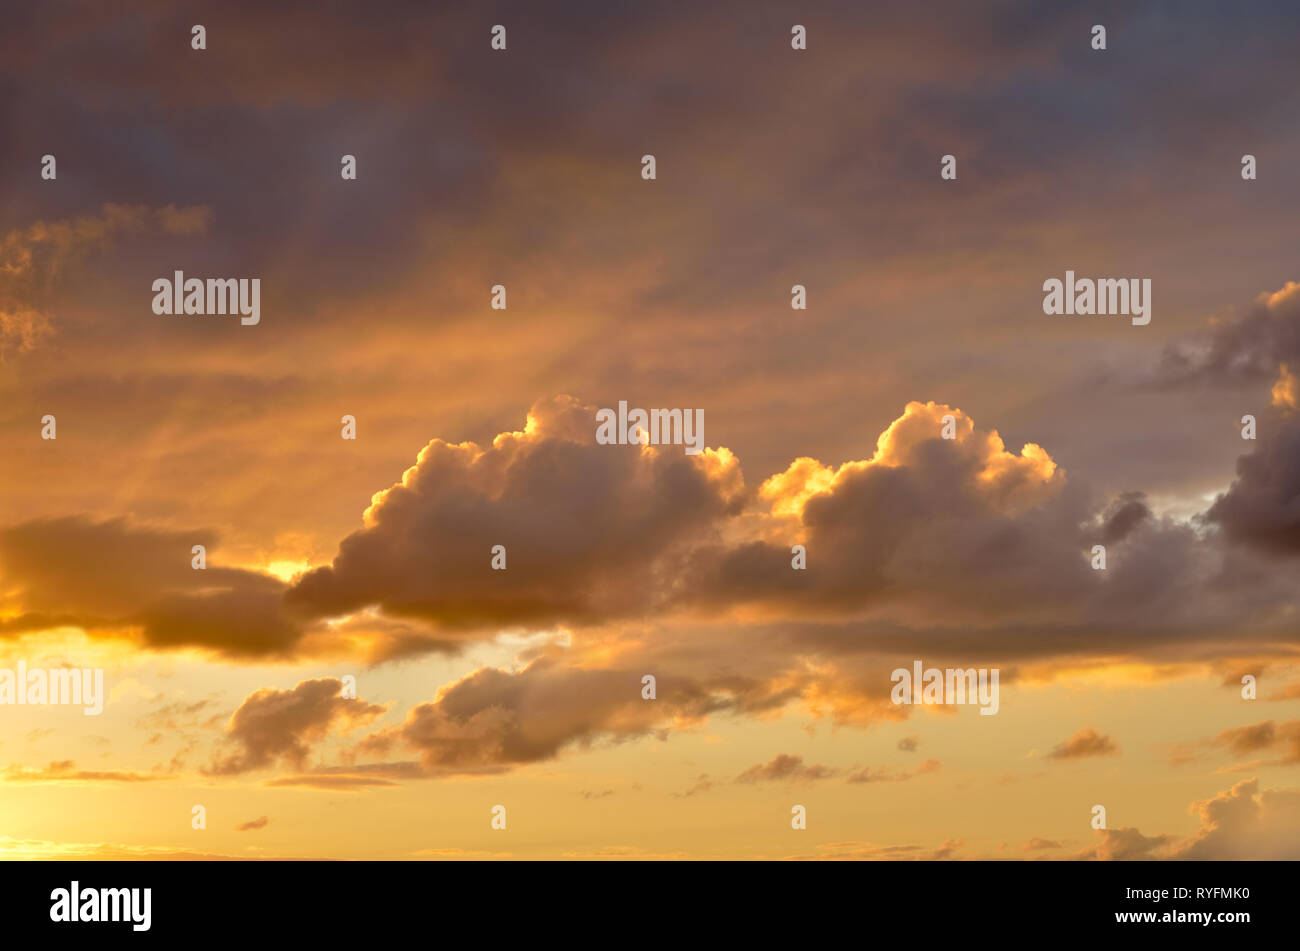 Cloudy sky at sunset,summer evening sky showing rays from setting sun. Stock Photo